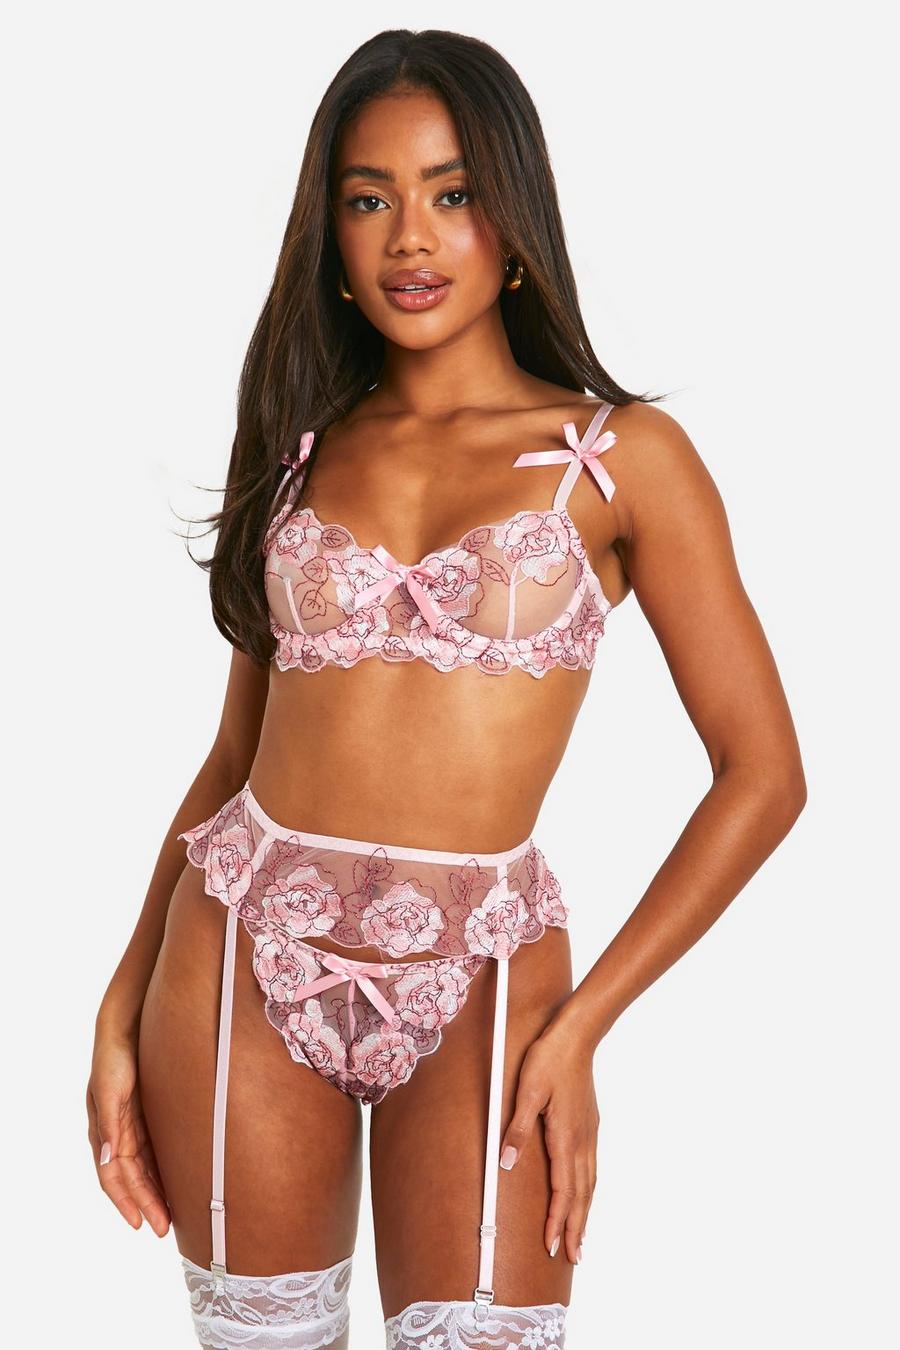 Pink Rose Lace Bra, Thong And Suspender Set 